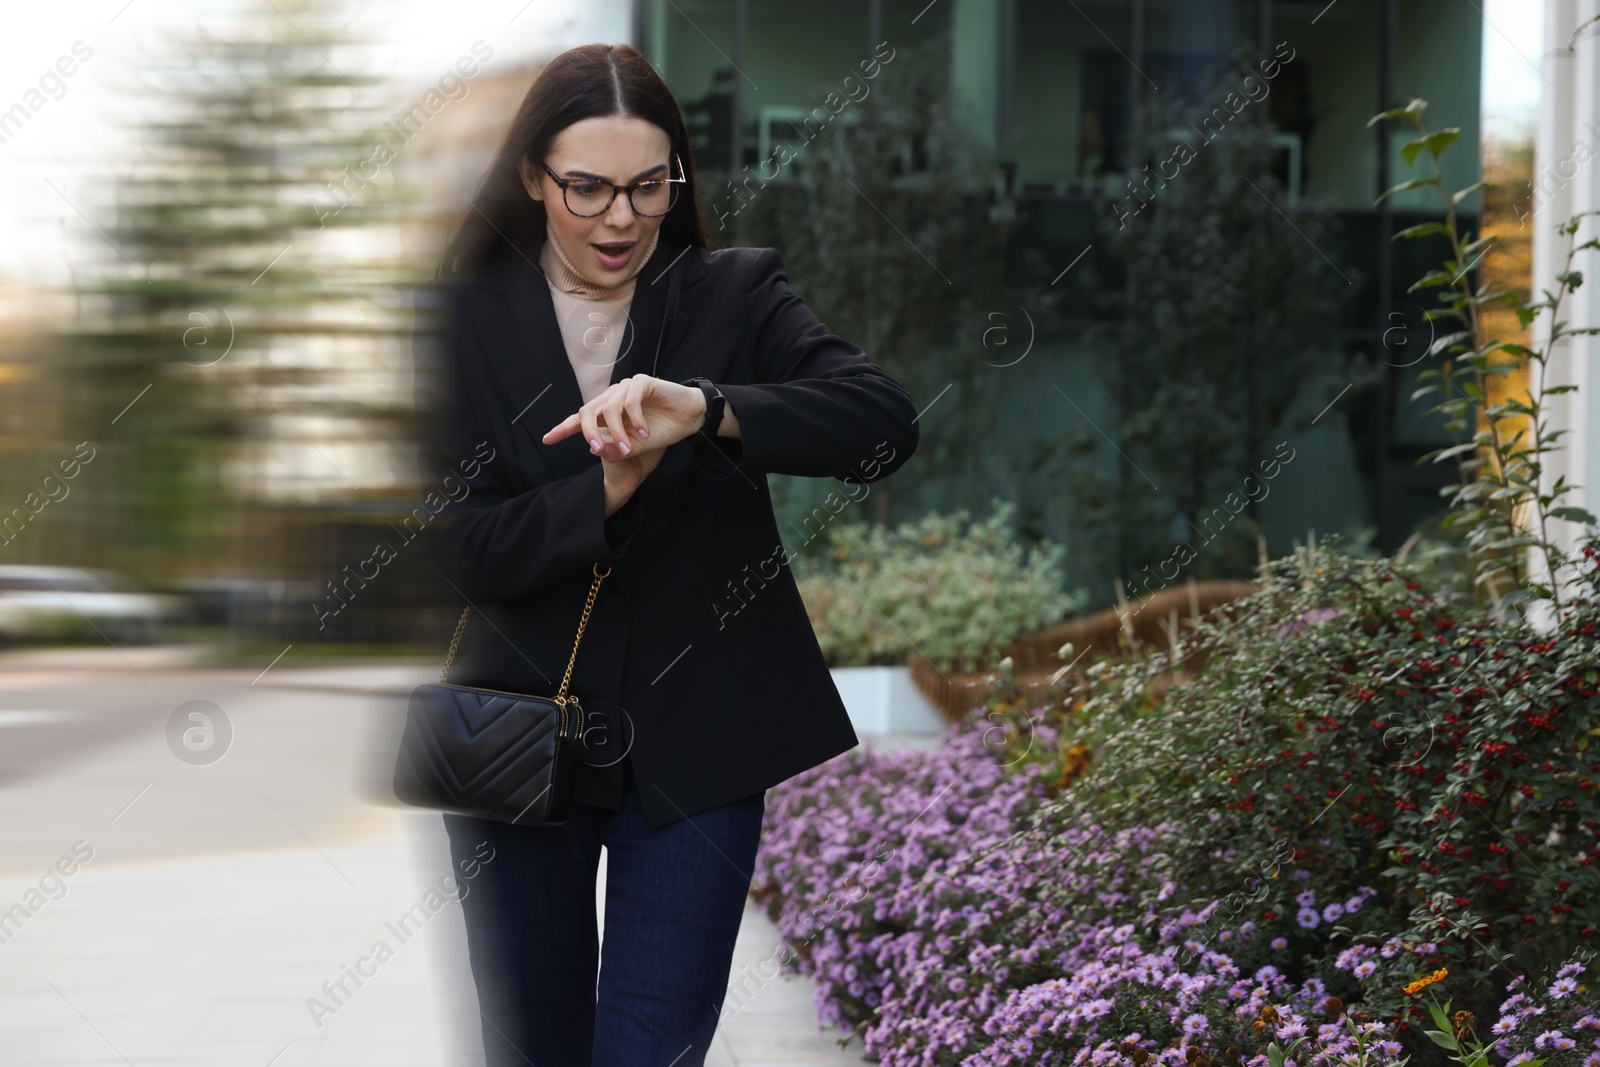 Image of Being late. Woman in hurry checking time outdoors. Motion blur effect